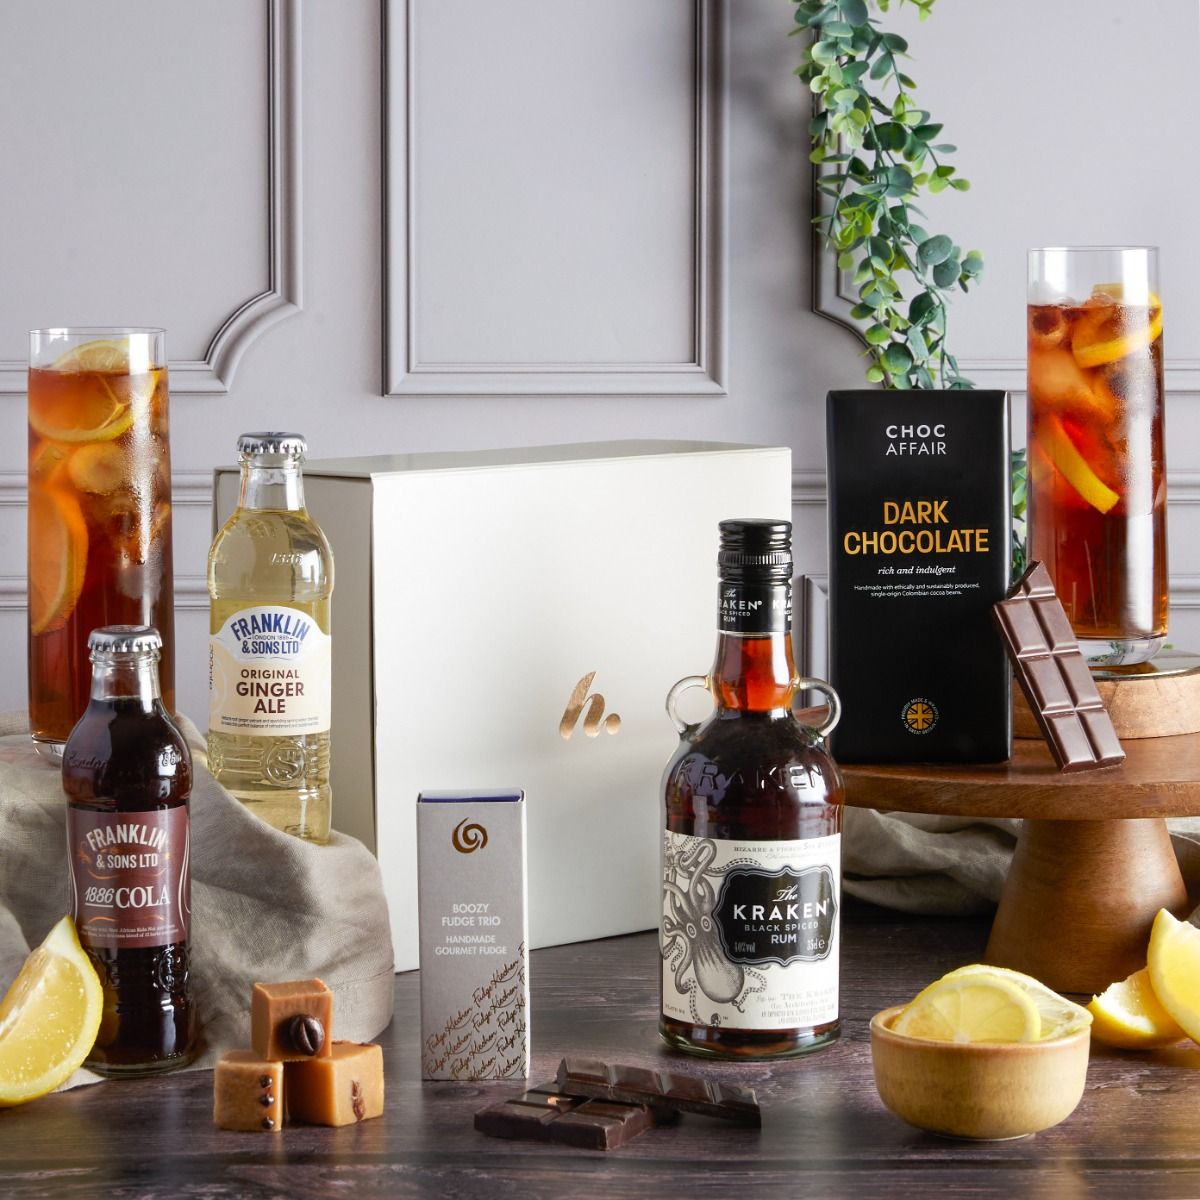 The Kraken Spiced Rum & Chocolate Gift as an idea for a Father's Day gift hamper